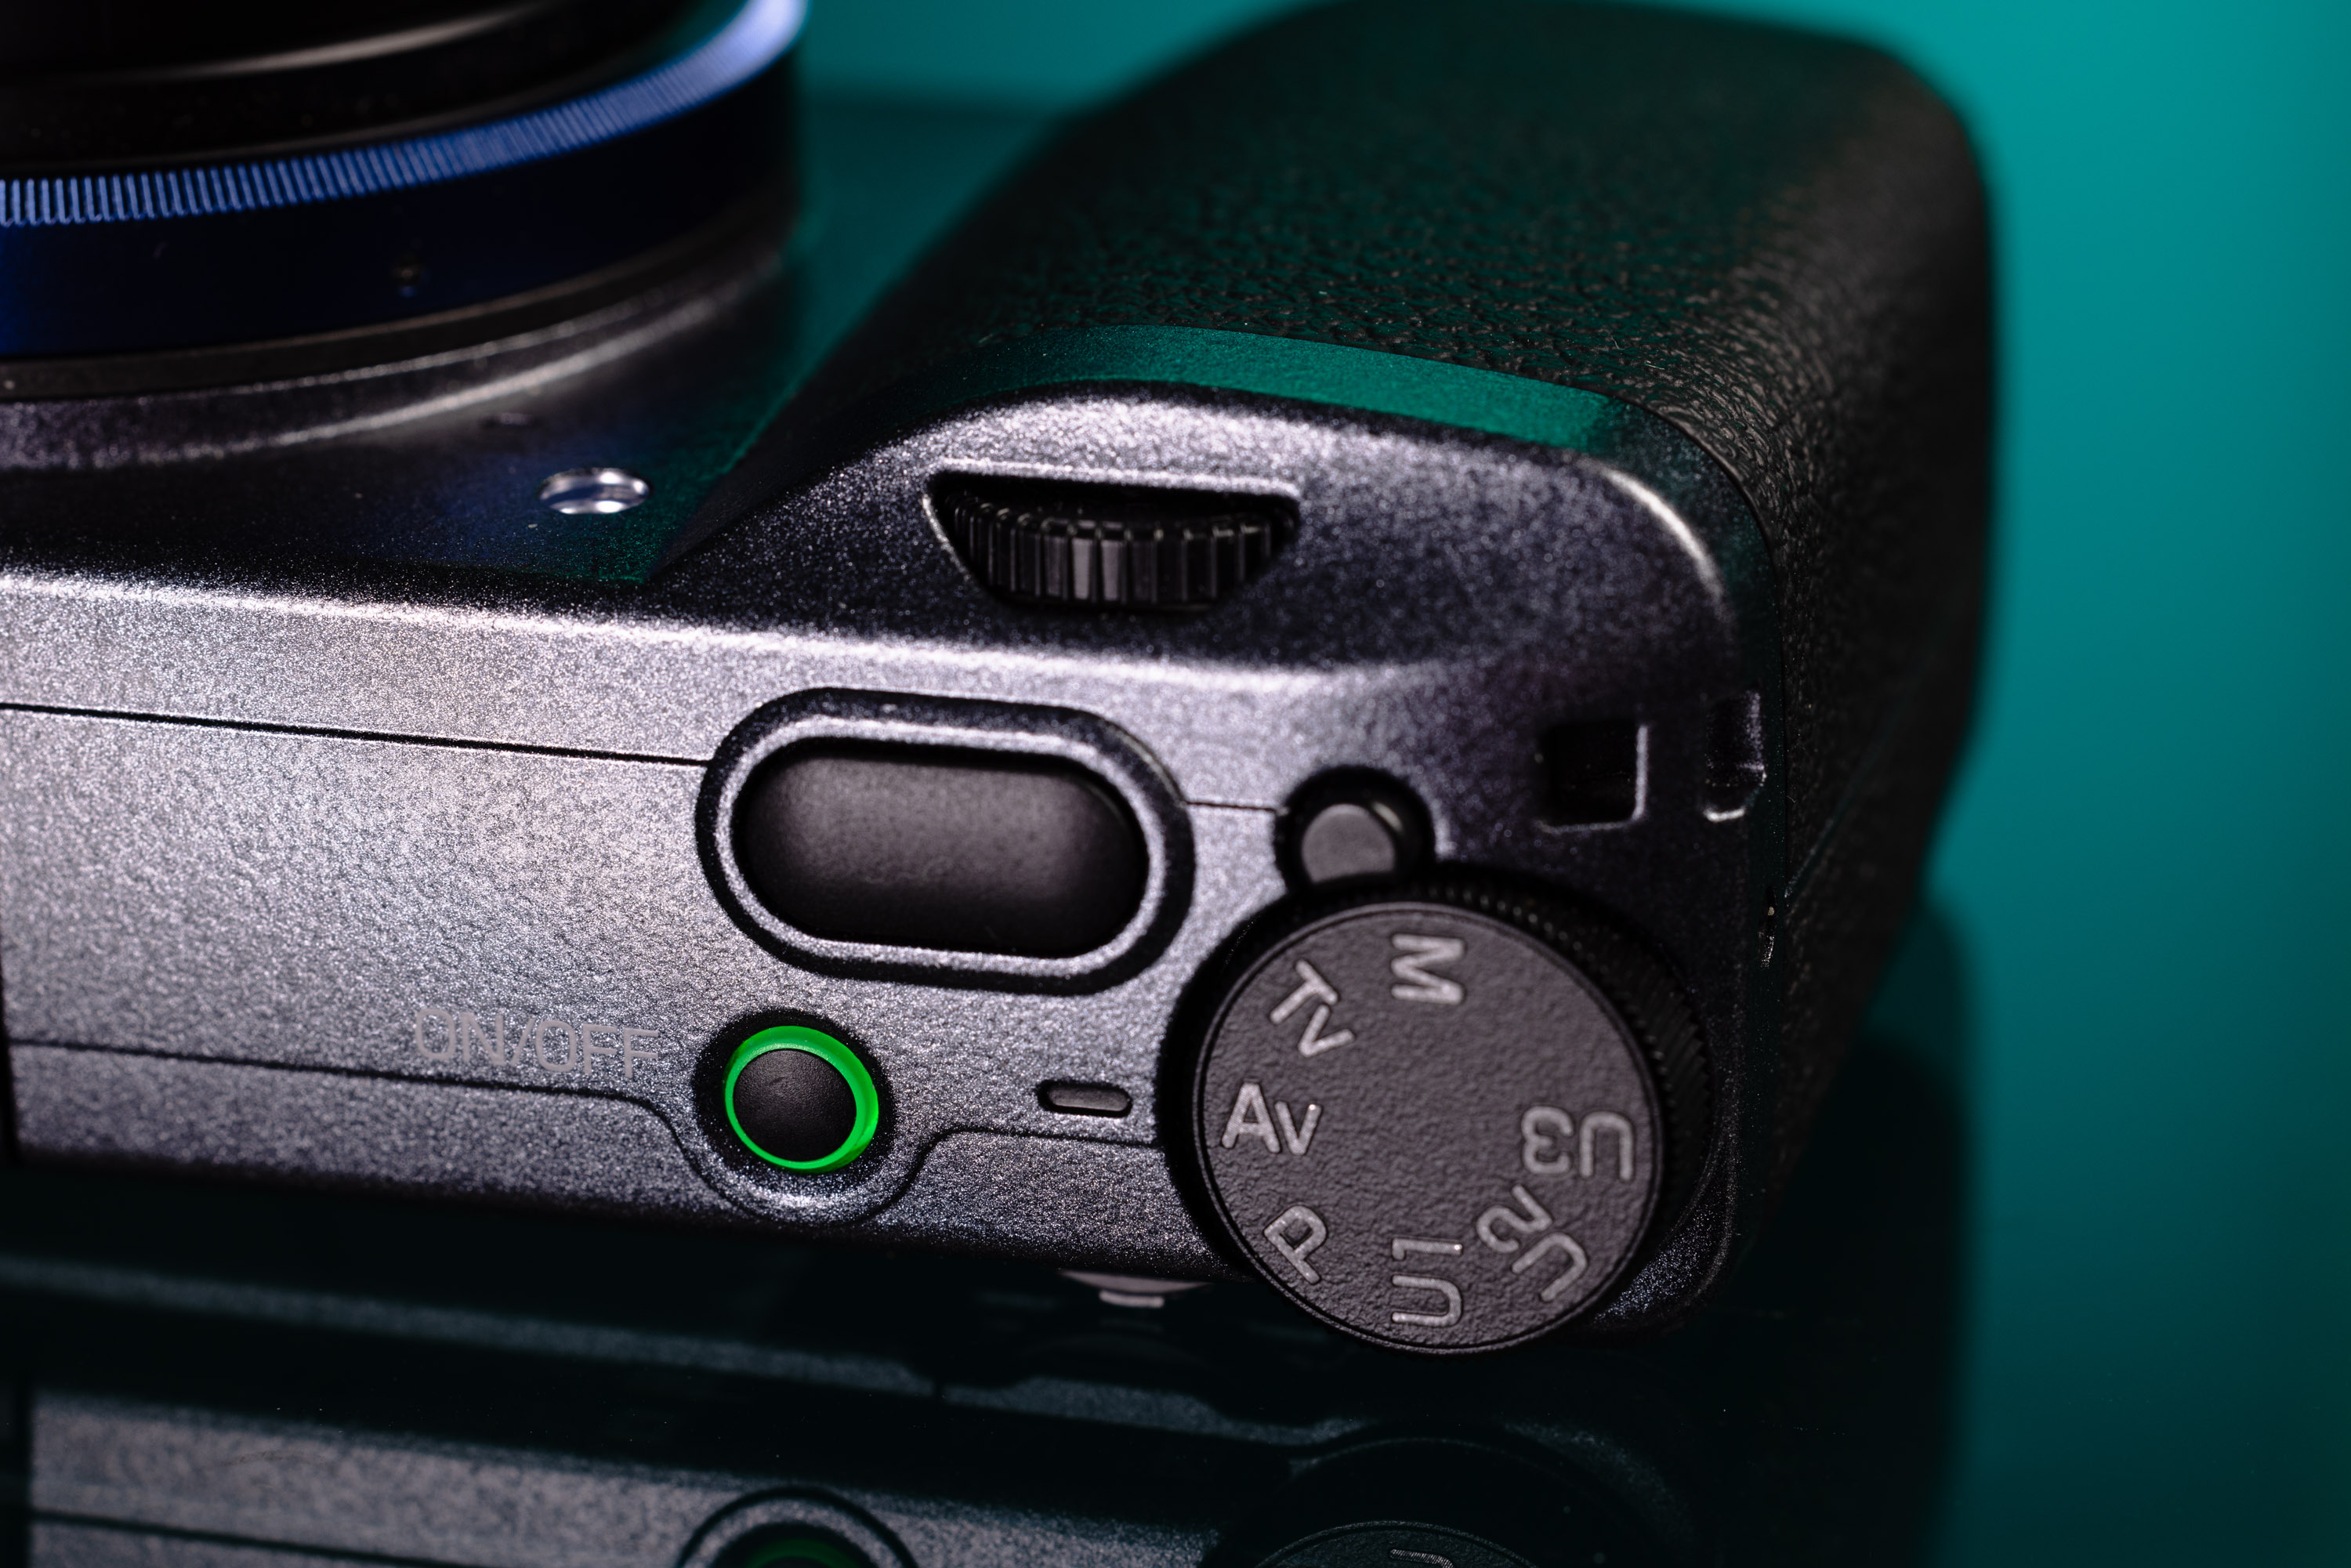 Review: Ricoh GR IIIx Compact Camera for Travel | MPB